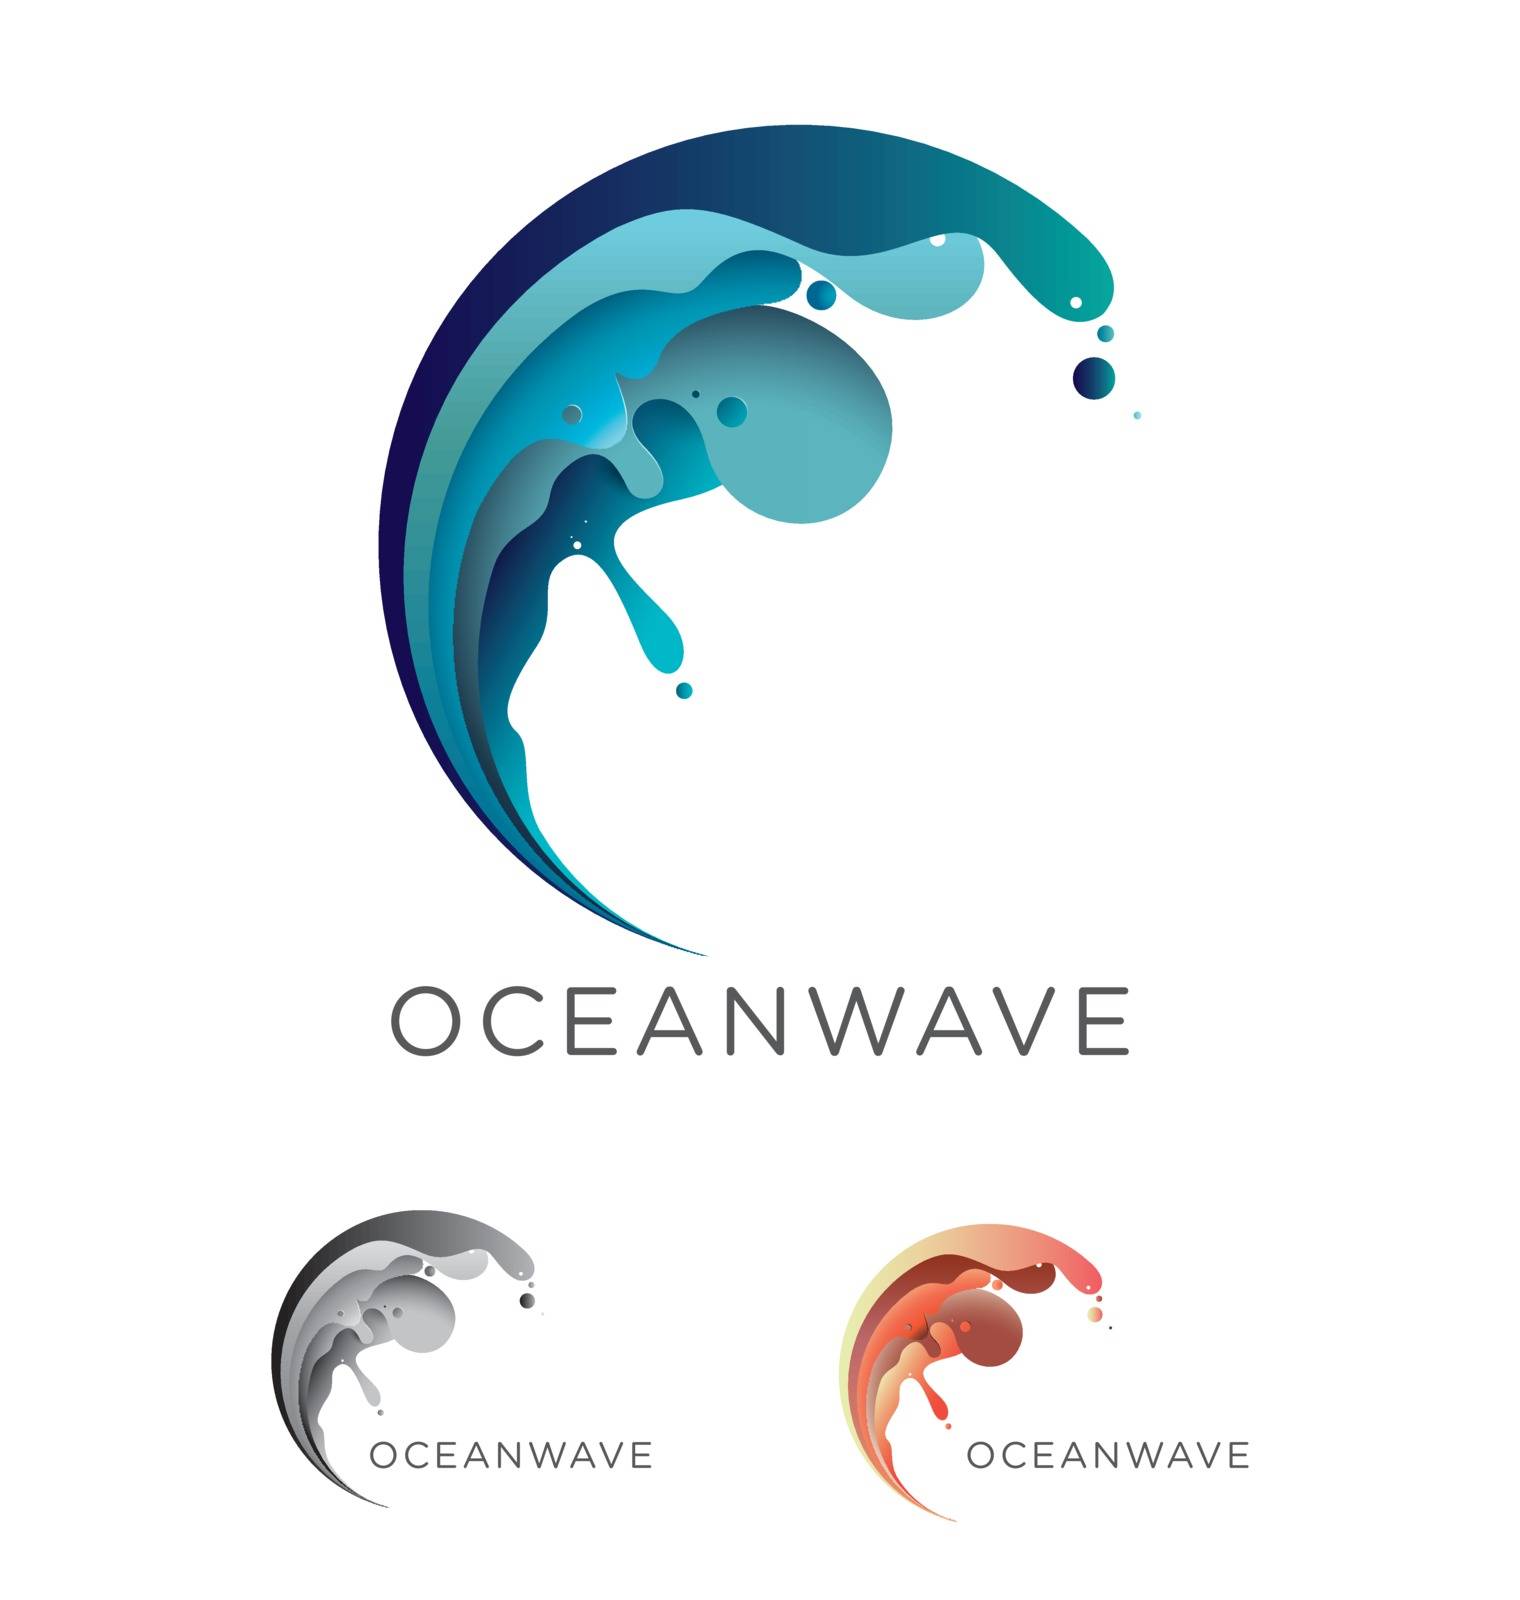 Abstract vector ocean wave emblem design in blue and teal tones including monochrome and coral-orange options